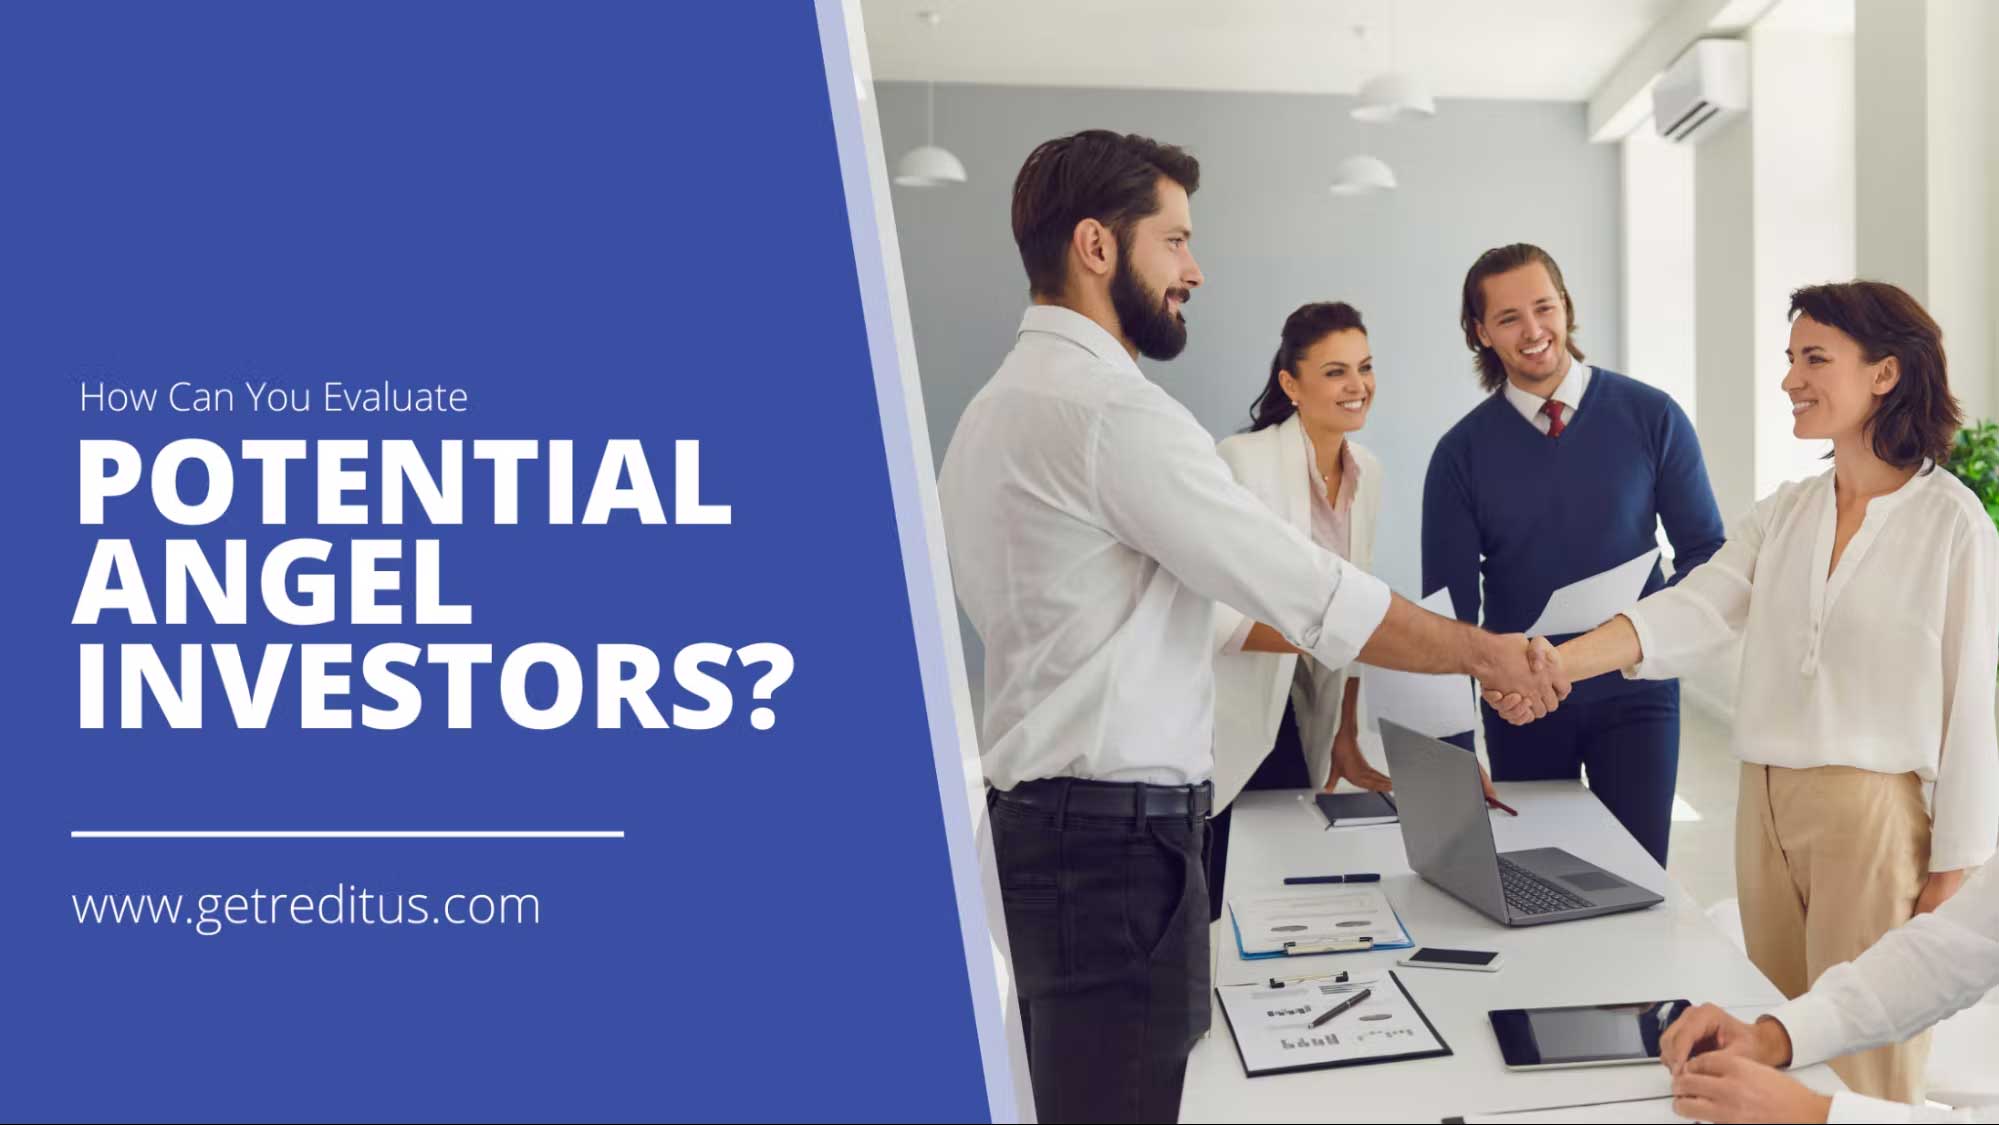 Want to Evaluate a Potential Angel Investor? Essential Questions.